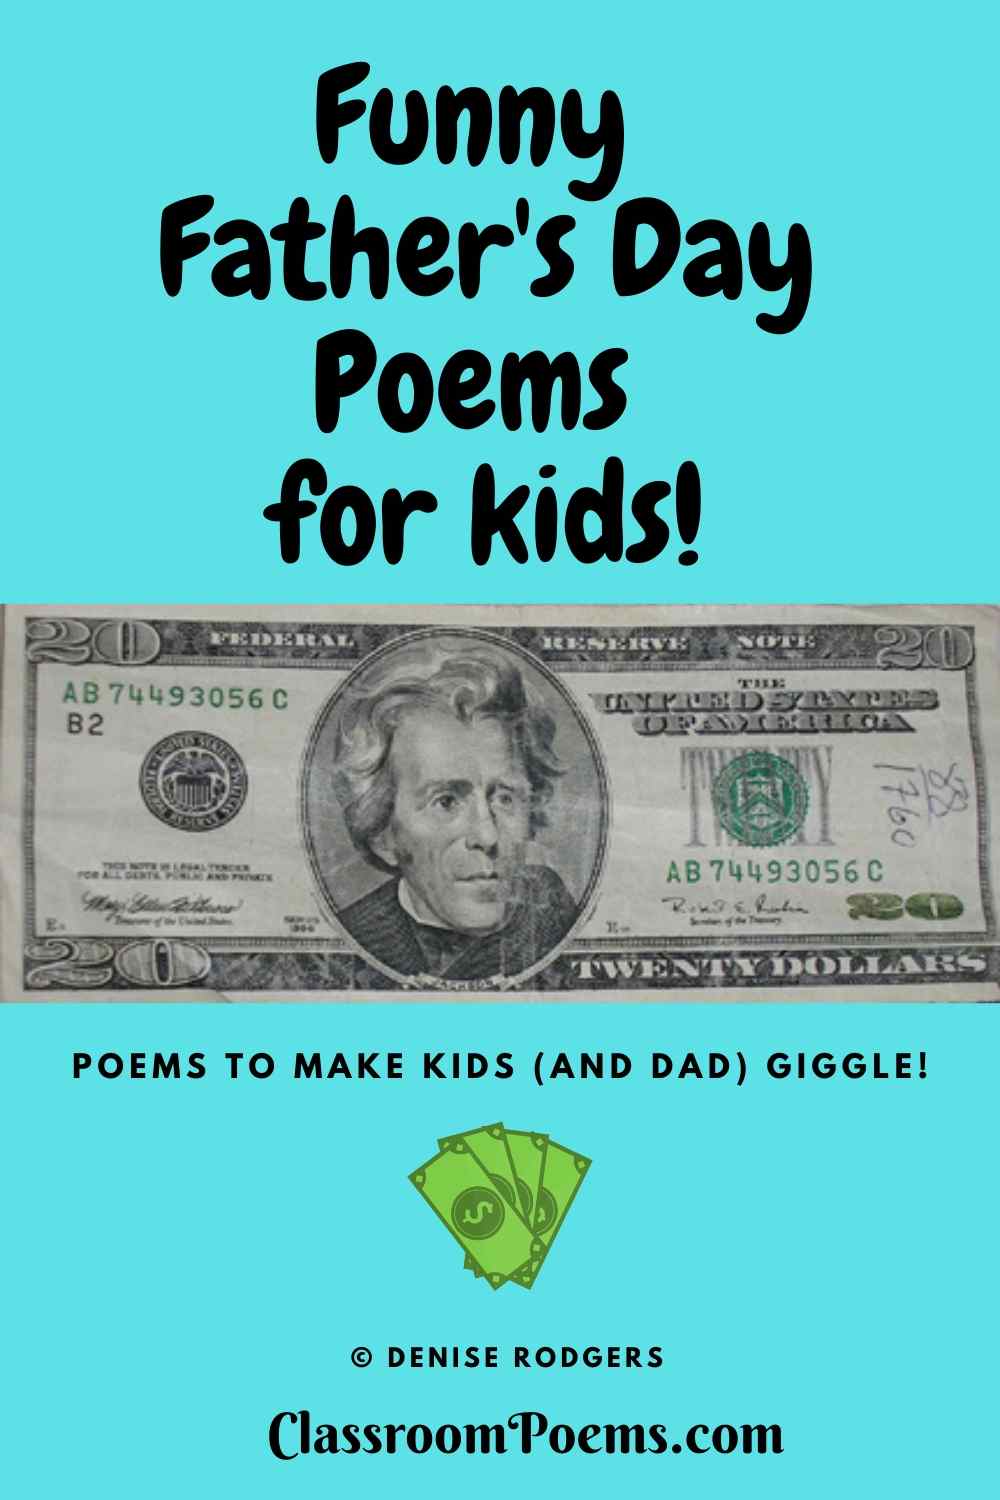 Funny Father's Day poem for kids by Denise Rodgers on ClassroomPoems.com.